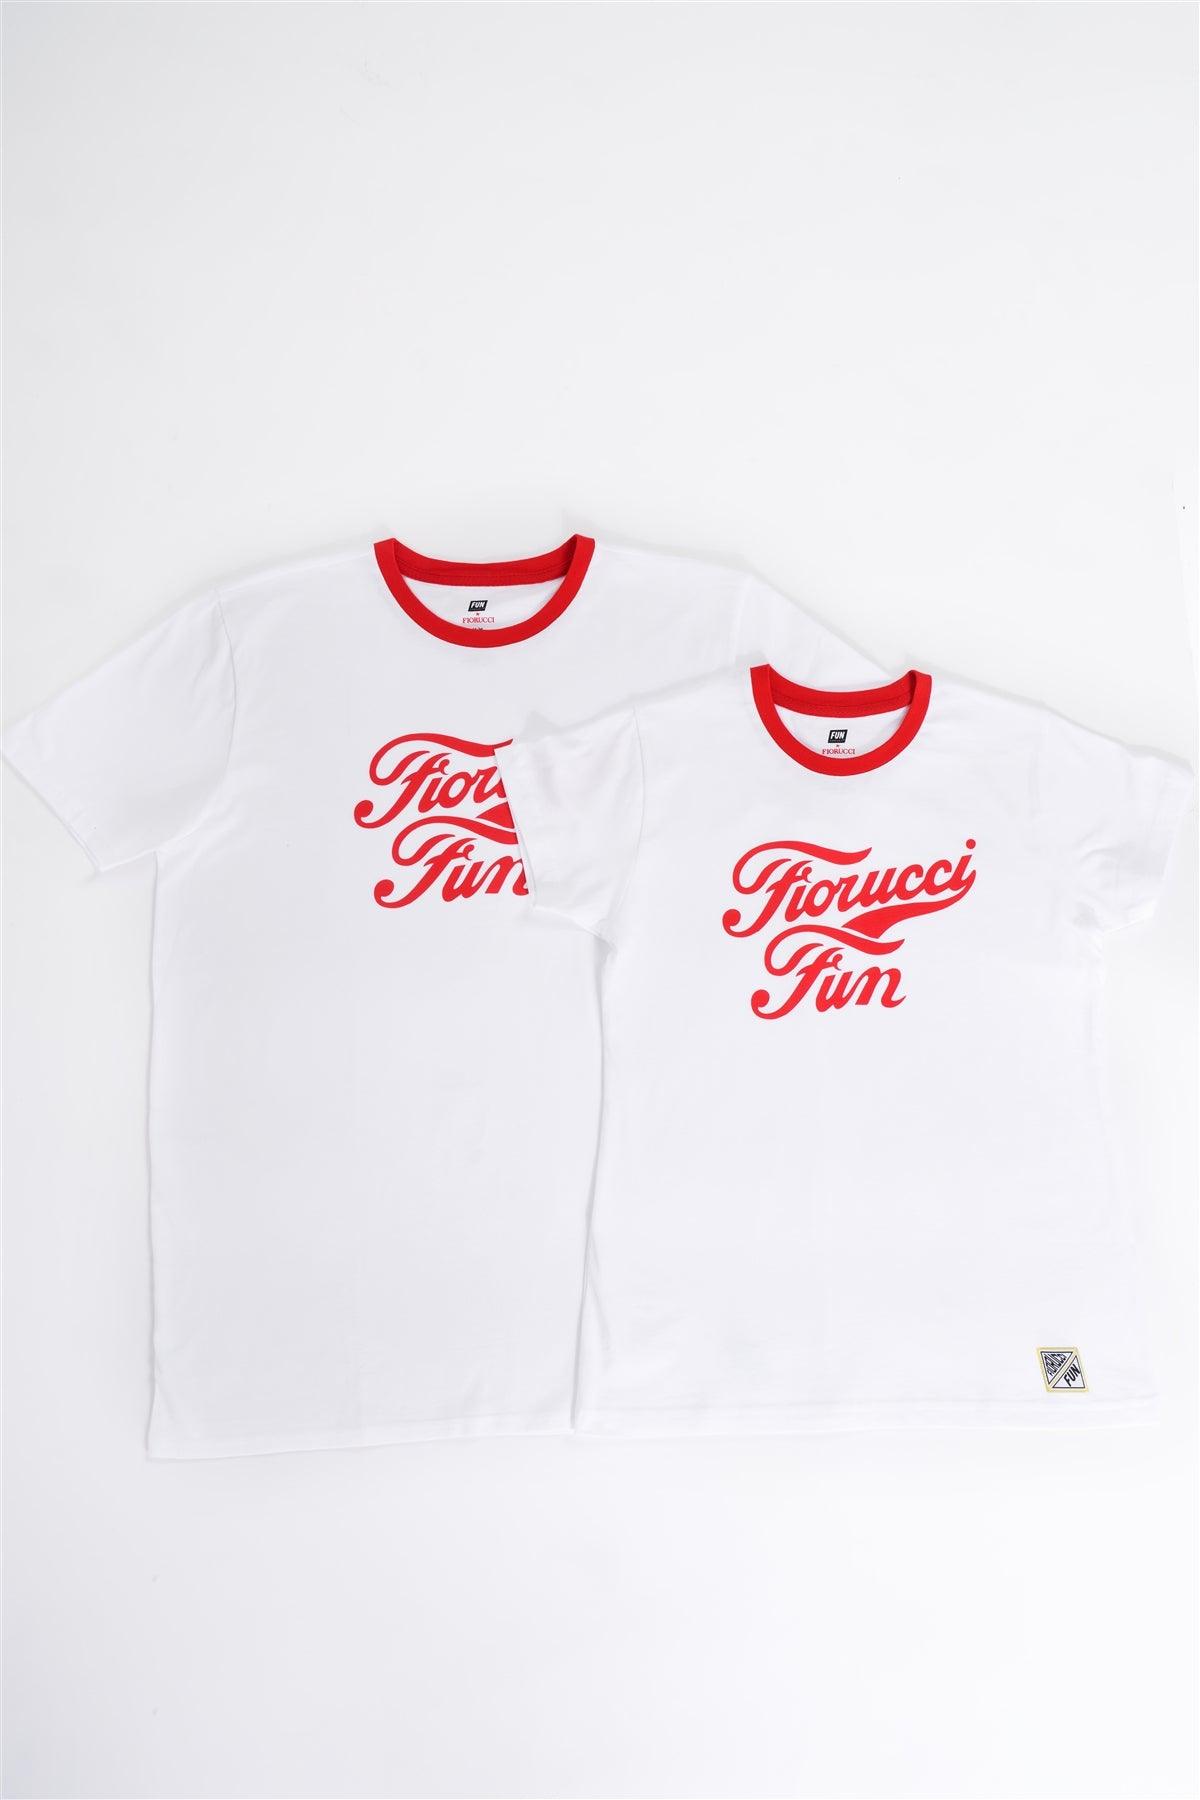 Fiorucci Fun White & Red Printed Logo T-Shirt For Her